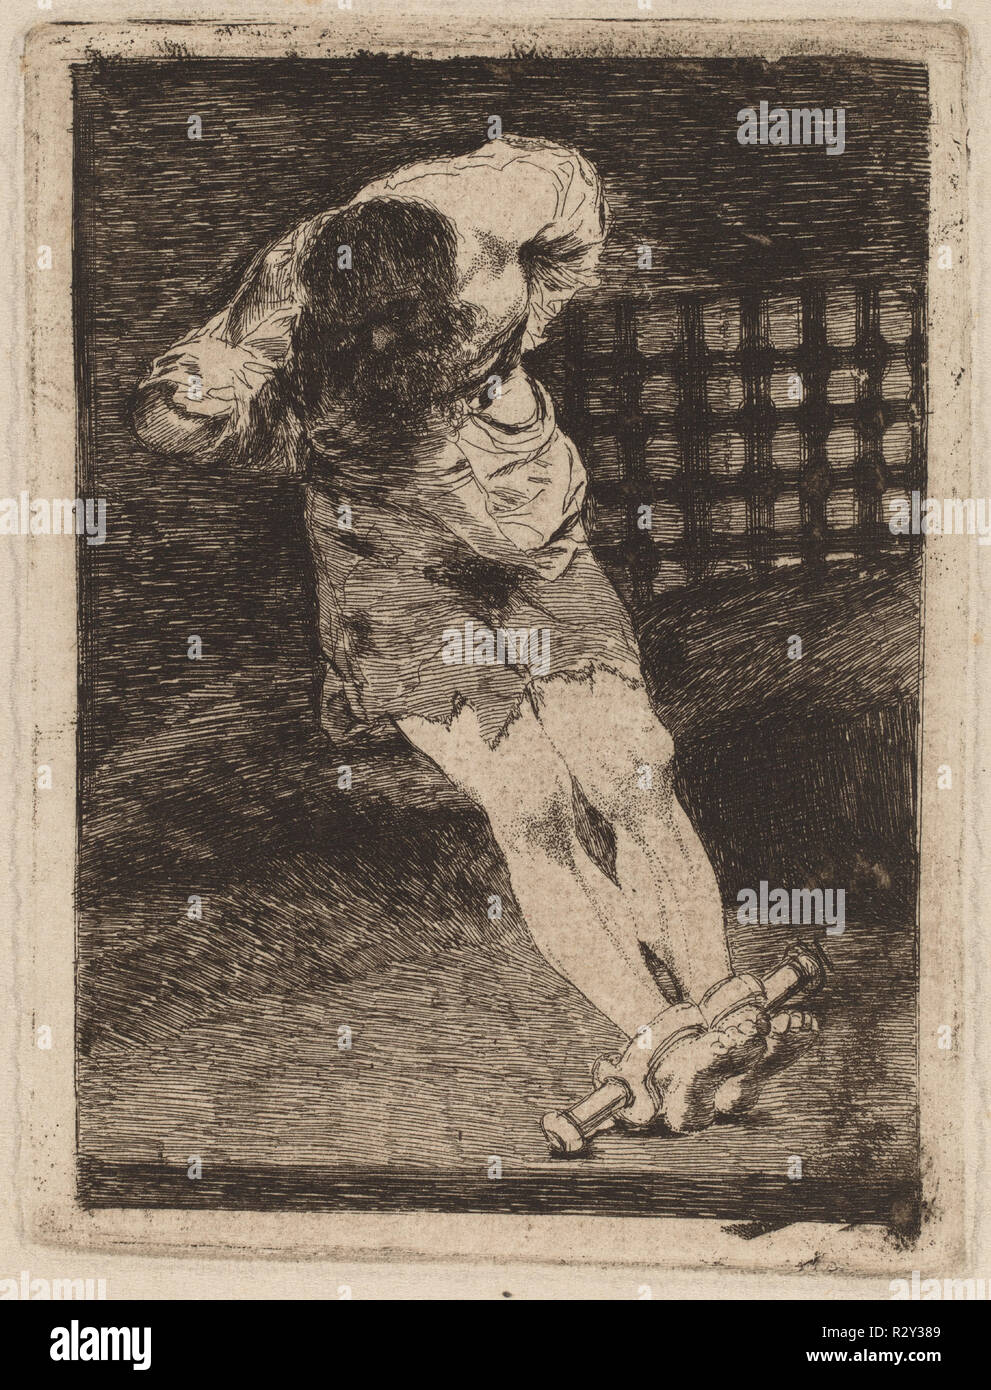 La seguridad de un reo no exige tormento  (The Custody of a Criminal Does Not Call for Torture. Dated: c. 1810. Medium: etching and burin [trial proof printed posthumously before 1859]. Museum: National Gallery of Art, Washington DC. Author: FRANCISCO DE GOYA. Stock Photo